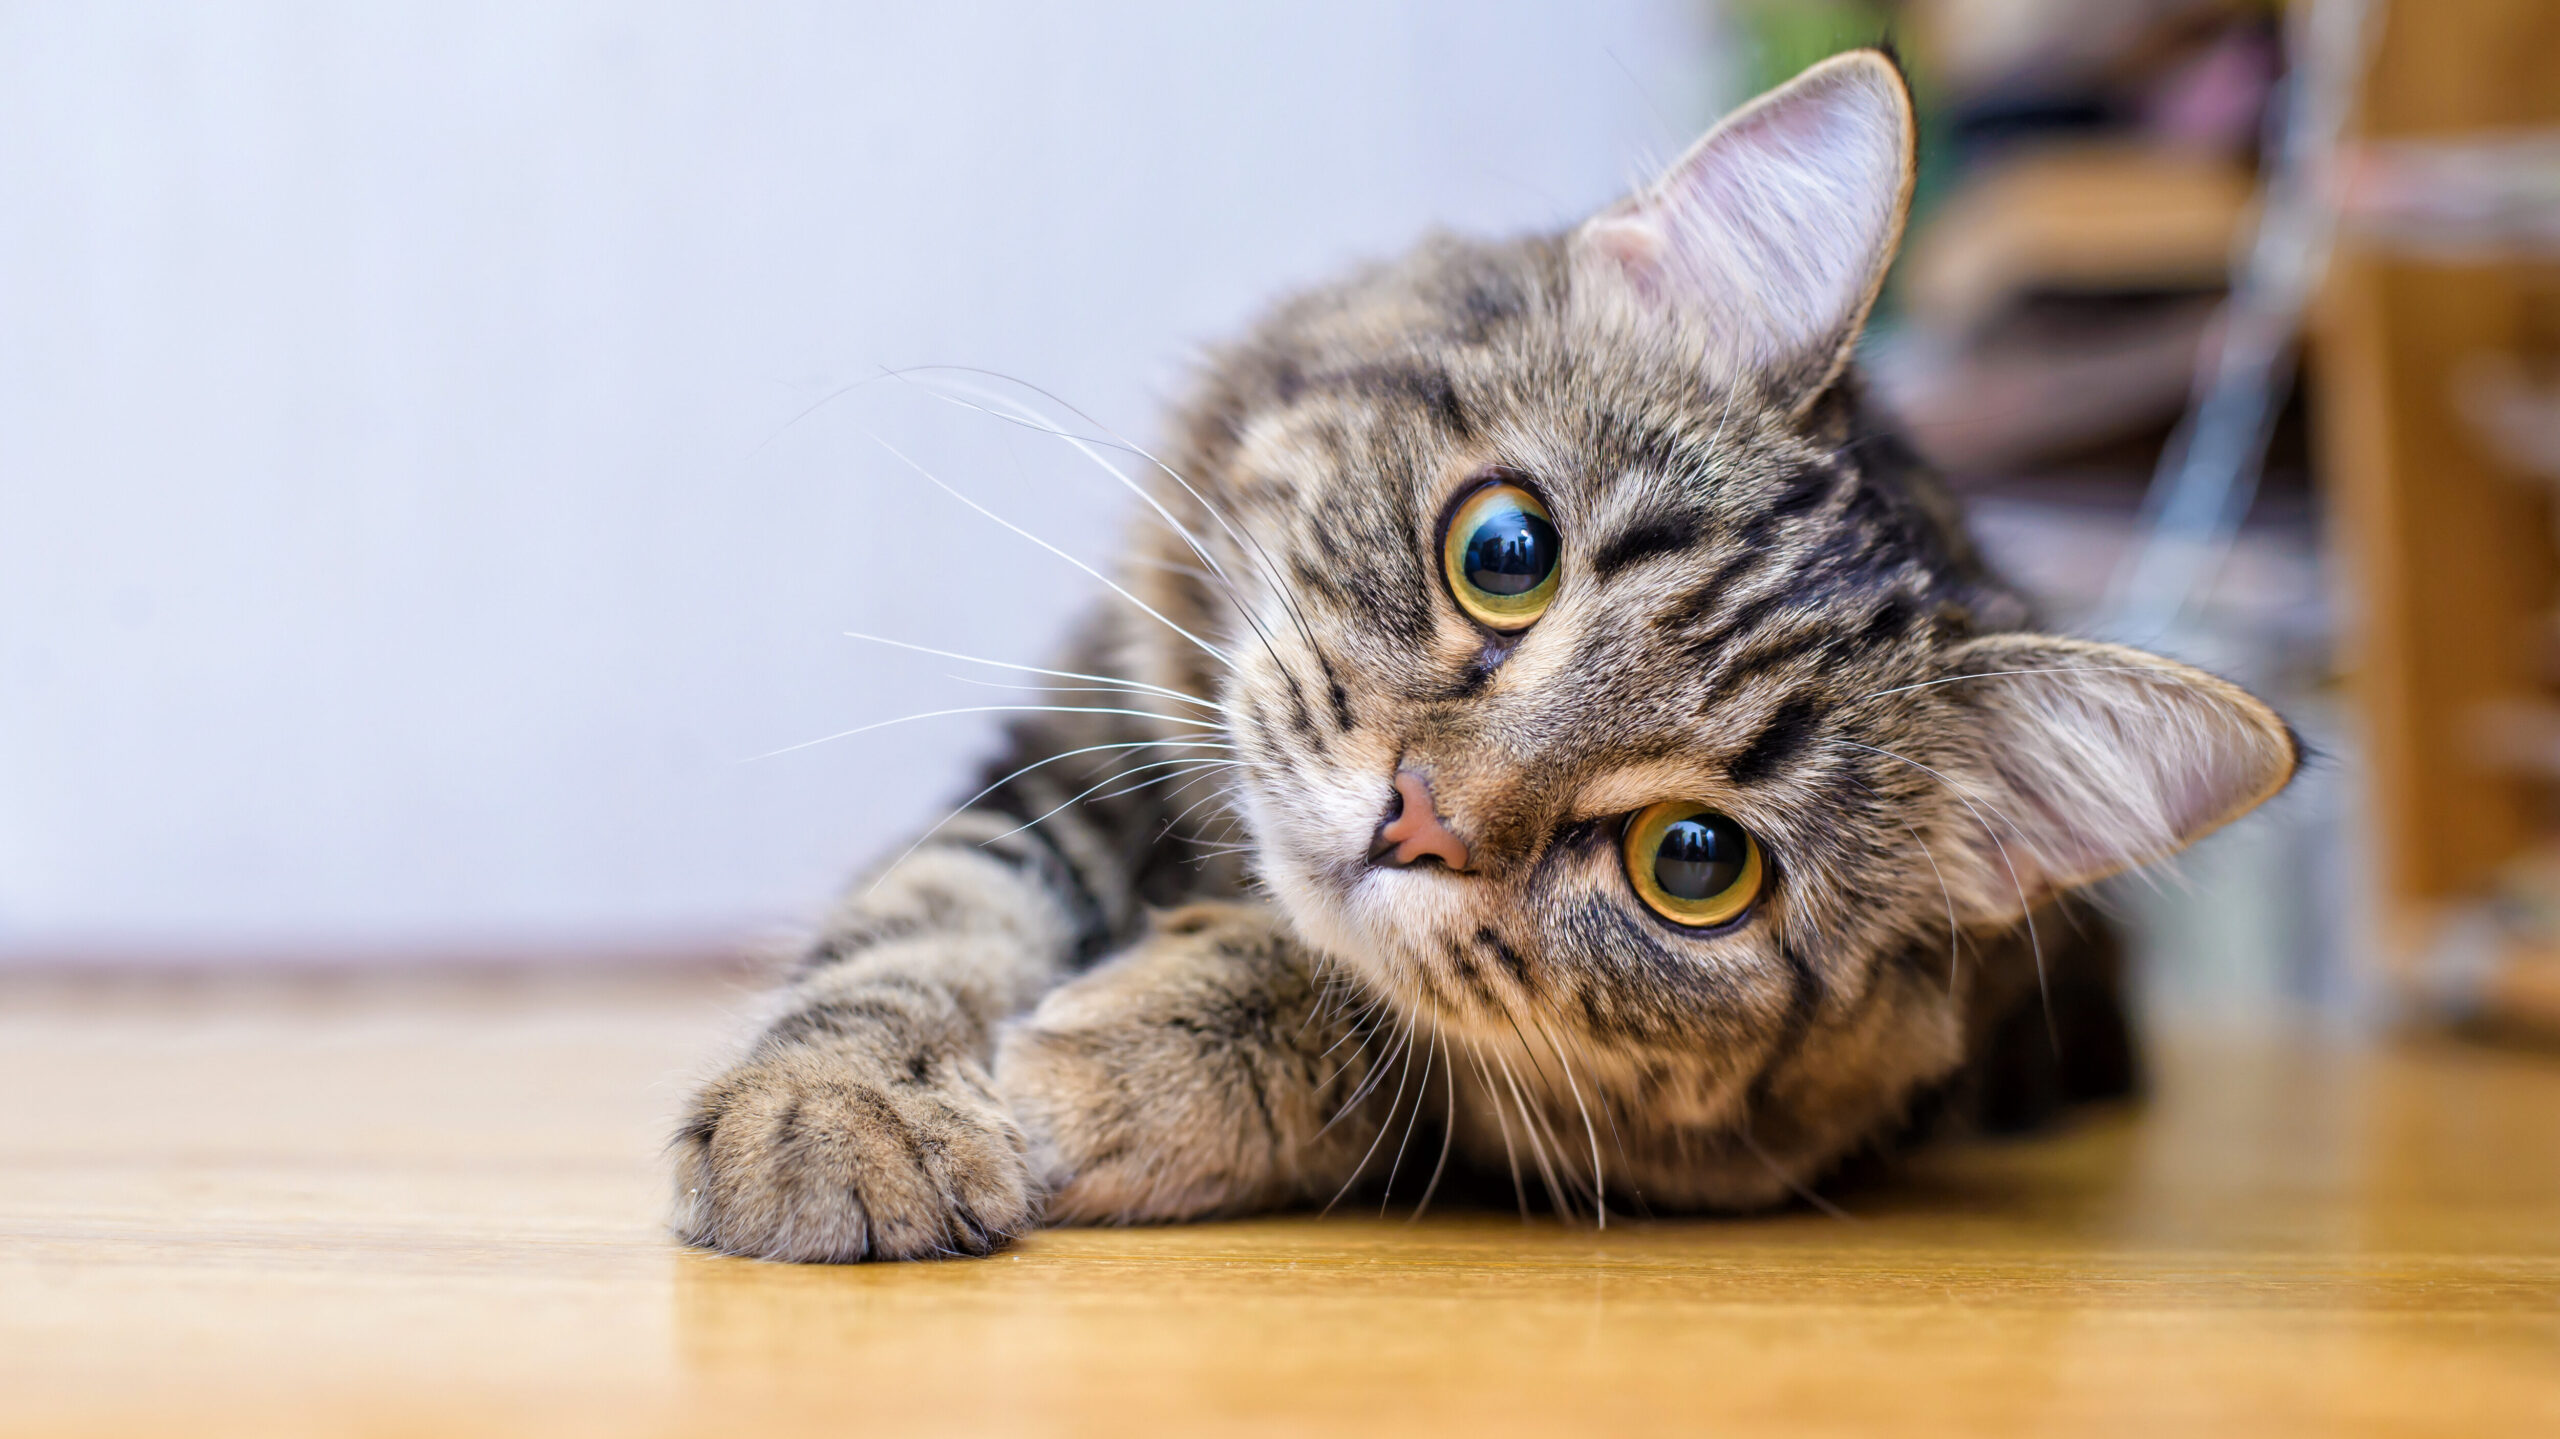 We're here to provide you with an overview of what pet anxiety is, its potential causes, and solutions to help your pet find relief